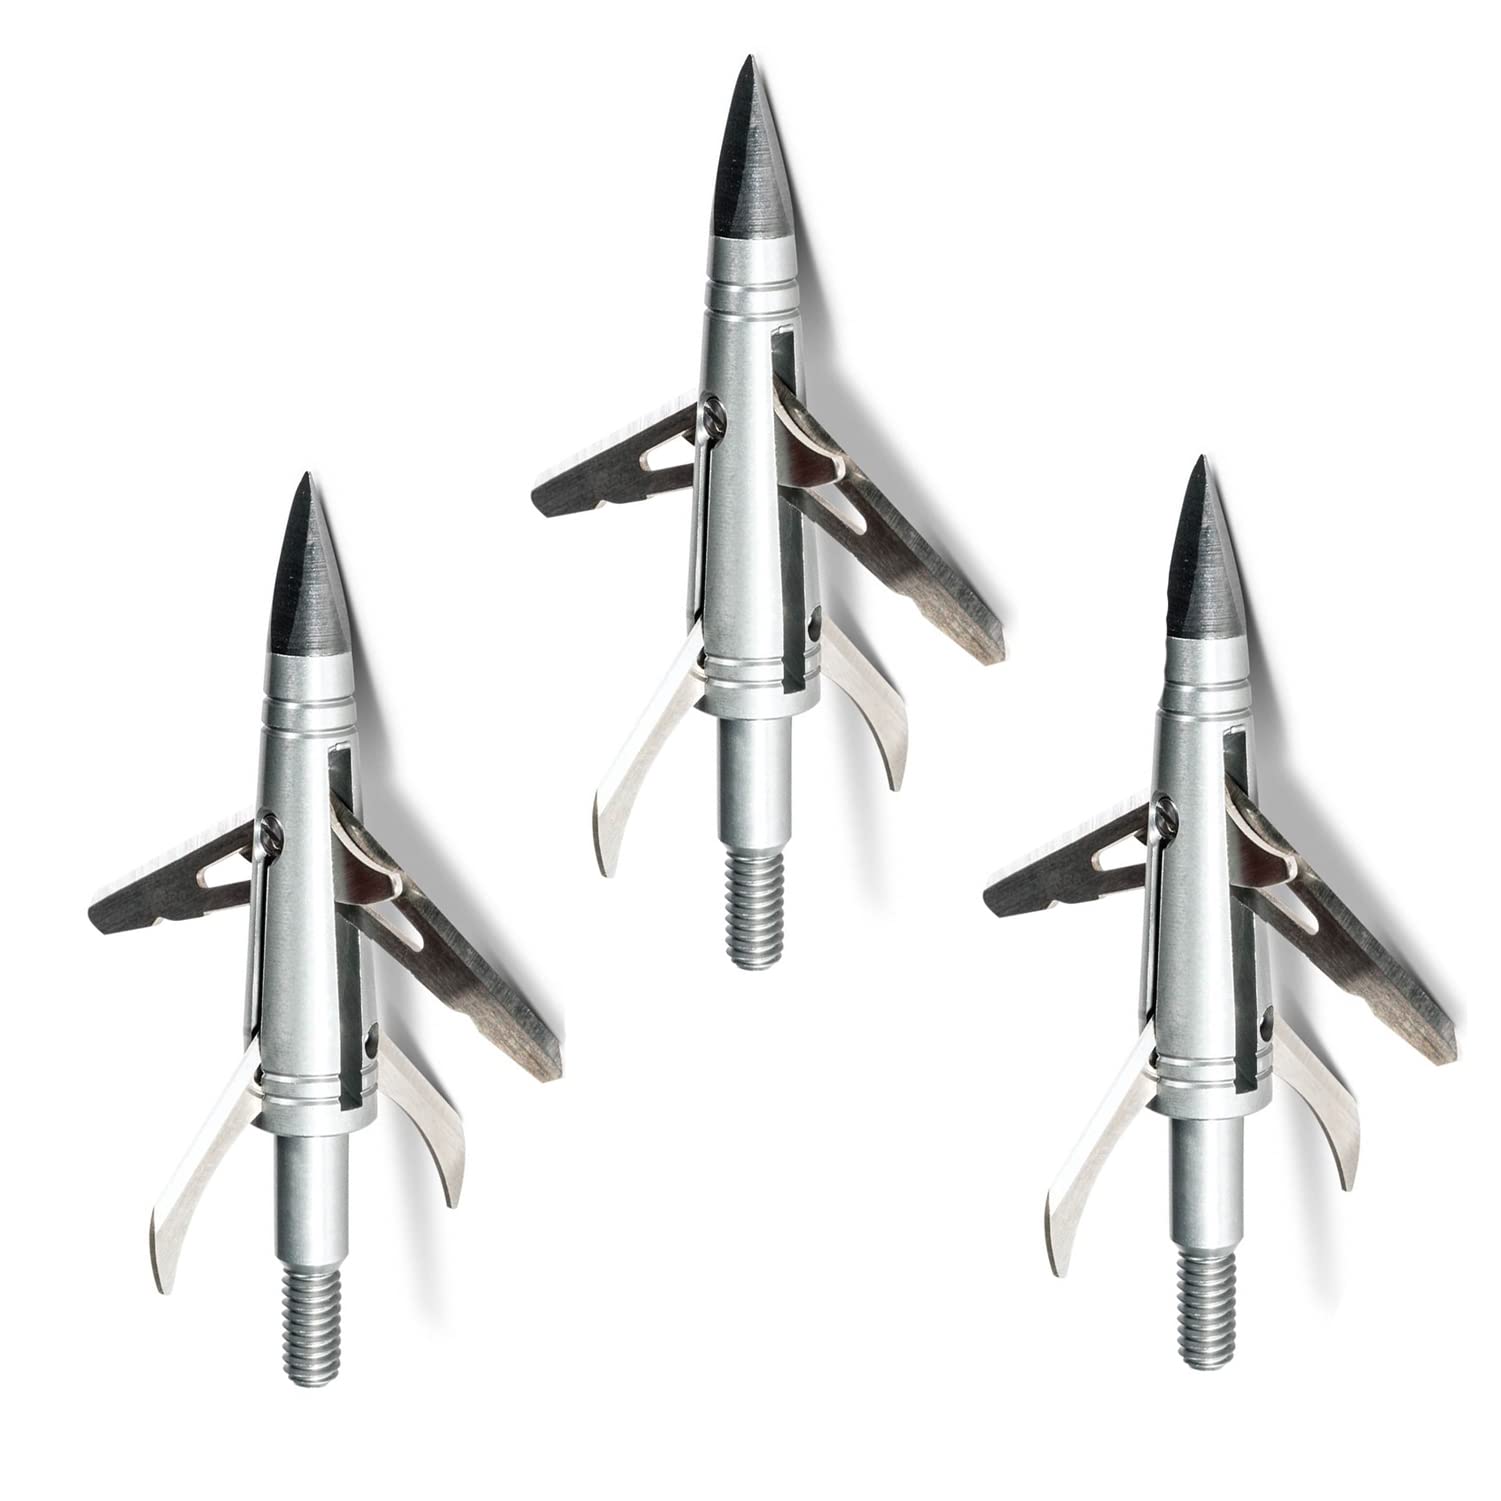 3-Pack Spitfire Double Cross 4-Blade 100 Grain Durable Precise Bow Hunting Mechanical Broadhead  $15.00 + Free Shipping w/ Prime or on $35+